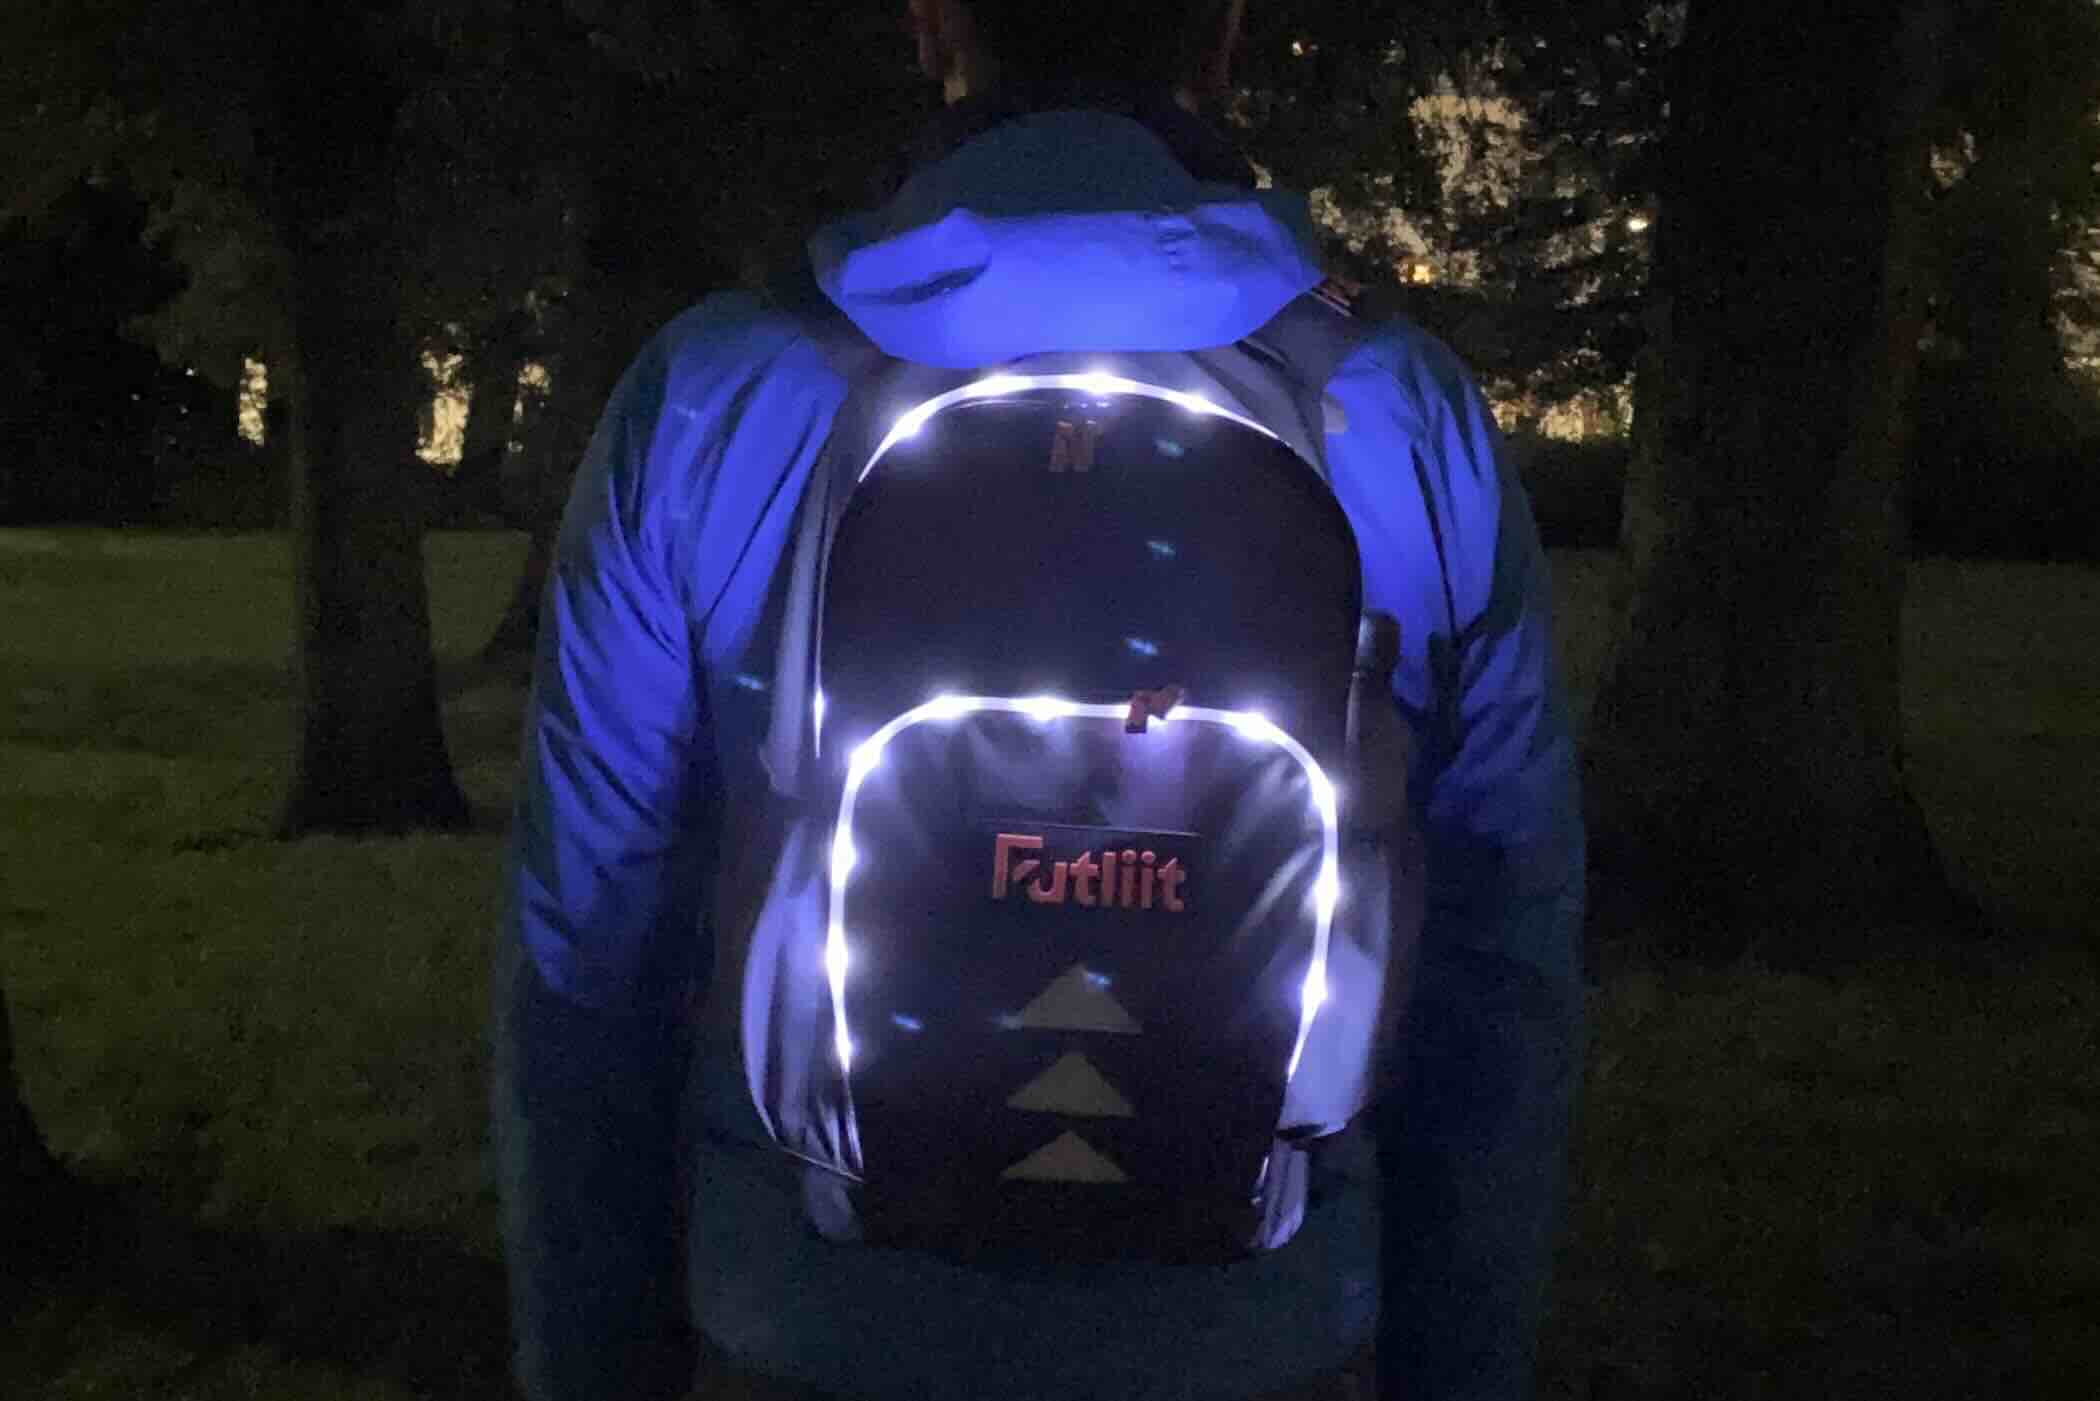 Commuter wearing a Futliit LED backpack in the dark